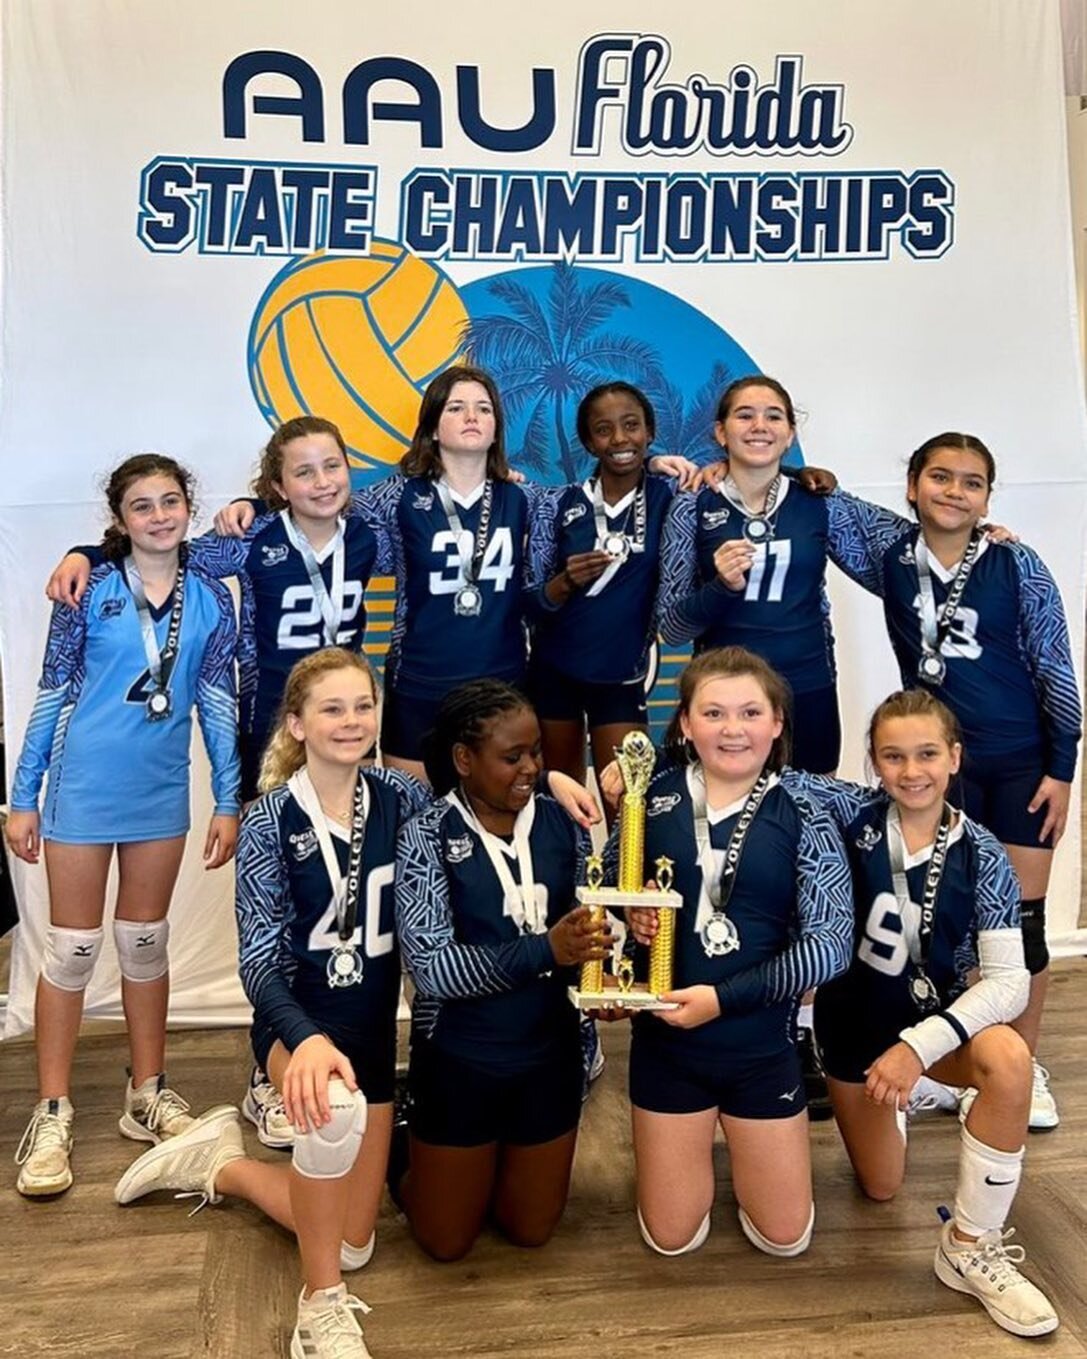 11 Taylor - 1st in Gold at the AAU State Championships!! 🏆 

This team is on a roll after their 2nd place finish at the ASICS Florida Volleyball Challenge last weekend 🙌🎉

The girls finished the season with an impressive 22 wins and 9 losses for t